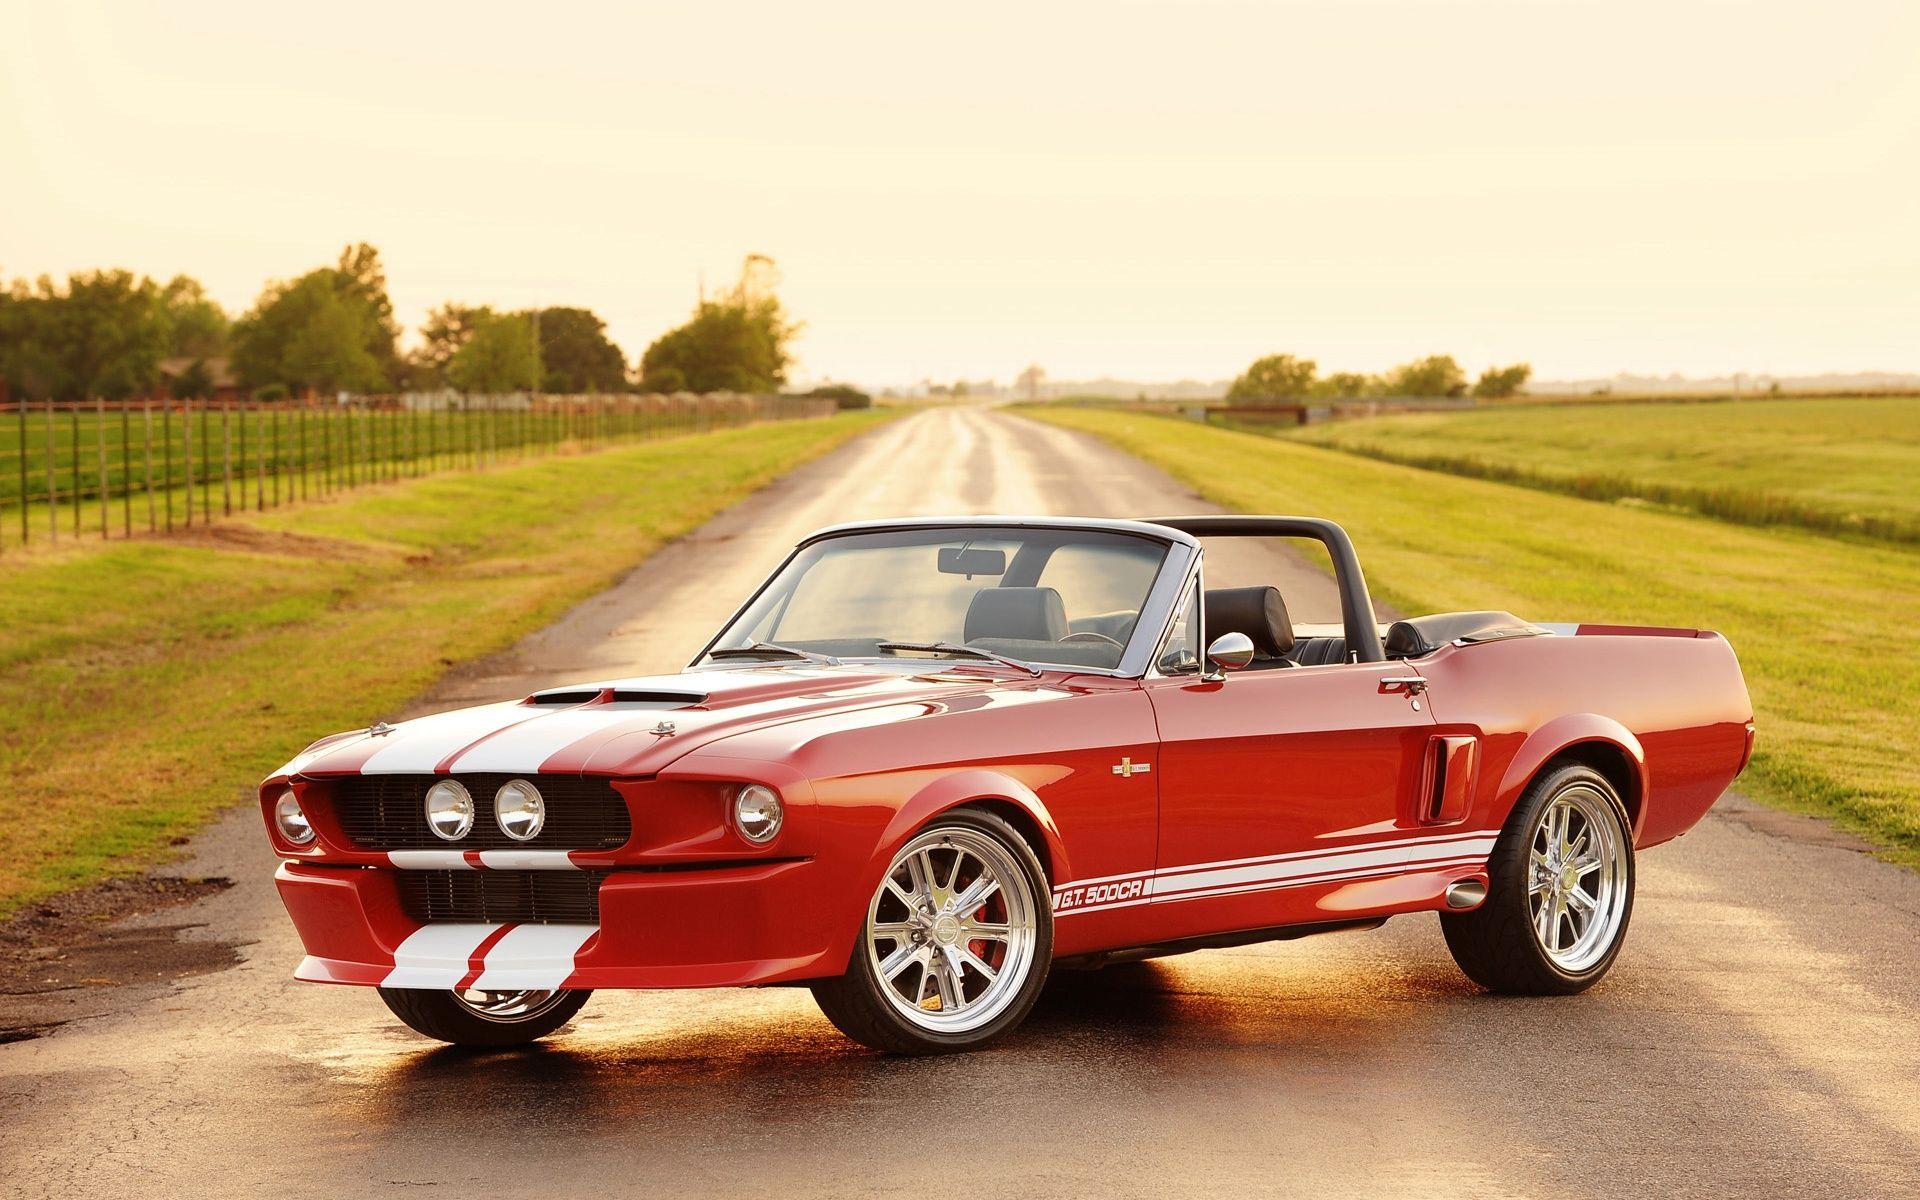 Ford shelby gt500 cool car picture wallpaper hd, ford